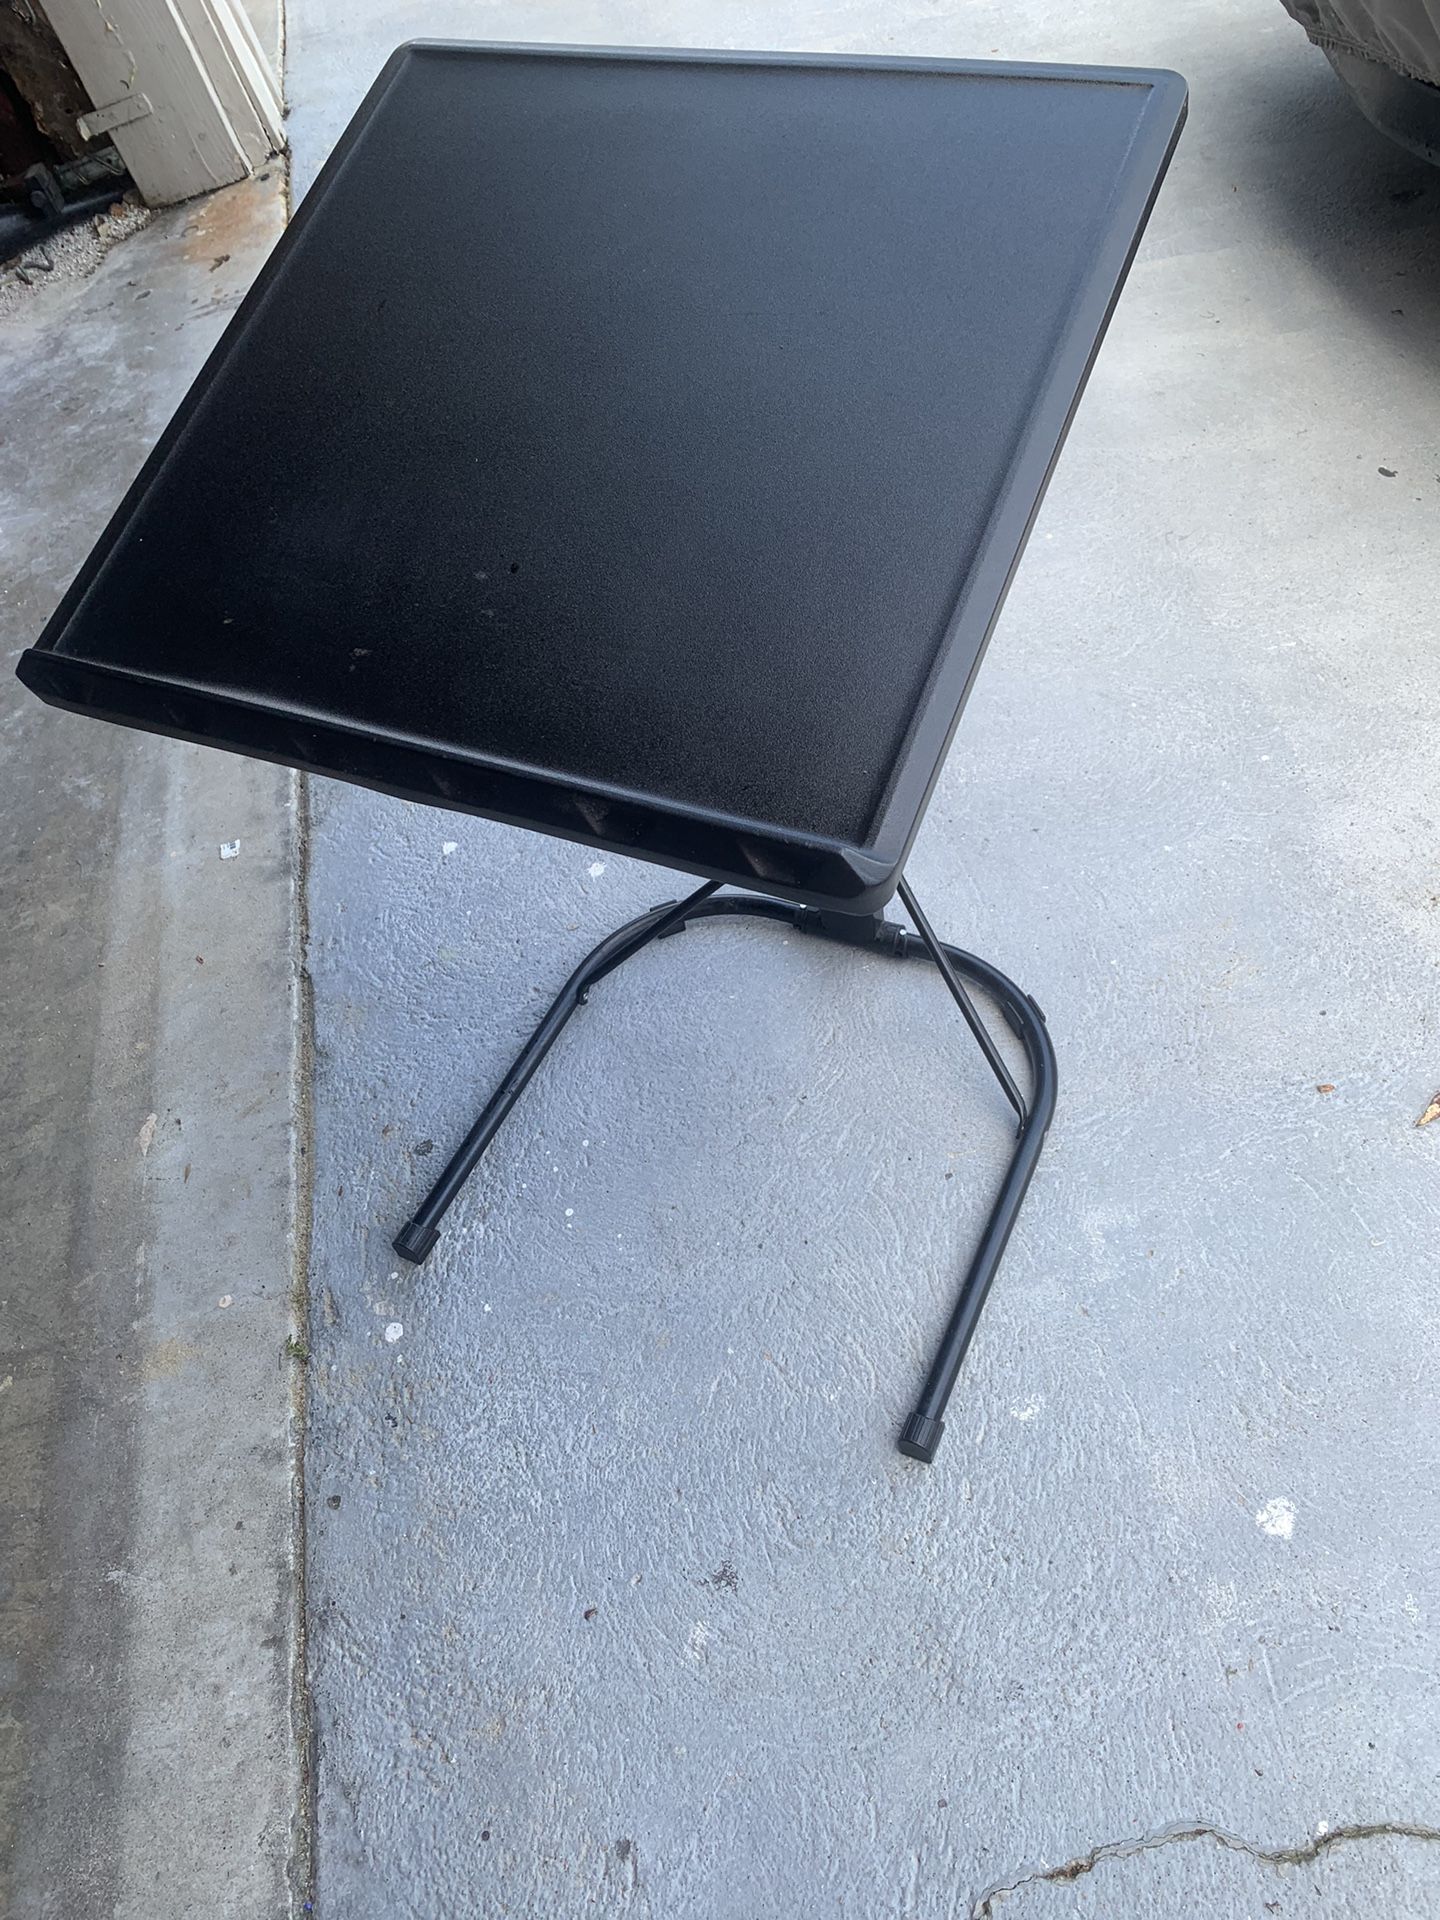 Folding , Adjustable  And Portable TV Tray. 17x17x 30 . Small Desk . Reduced From $20